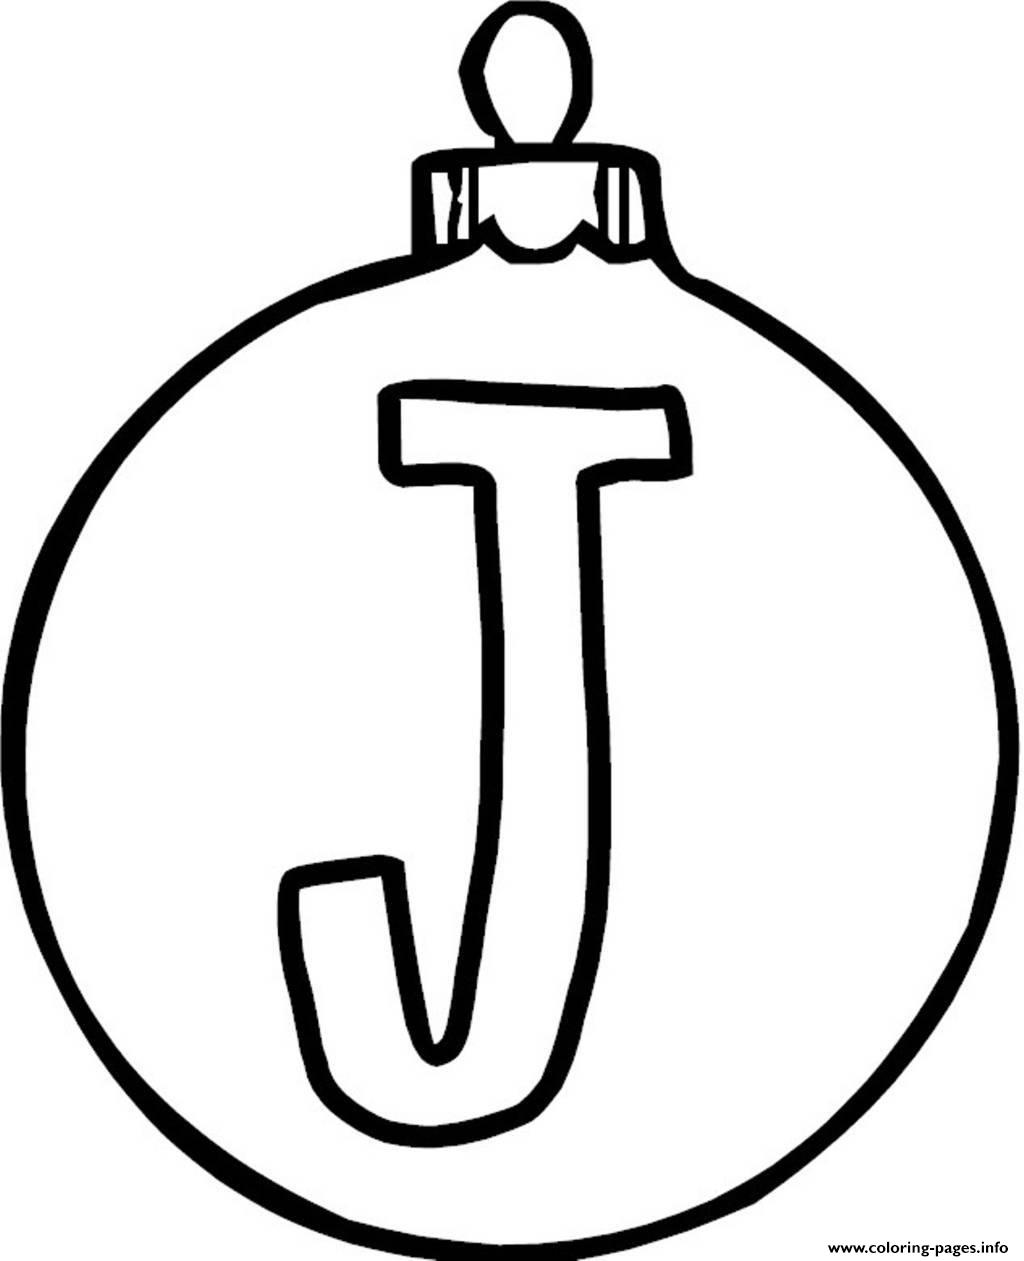 Coffee Table : Christmas Ornament Coloring Page Alphabet ...